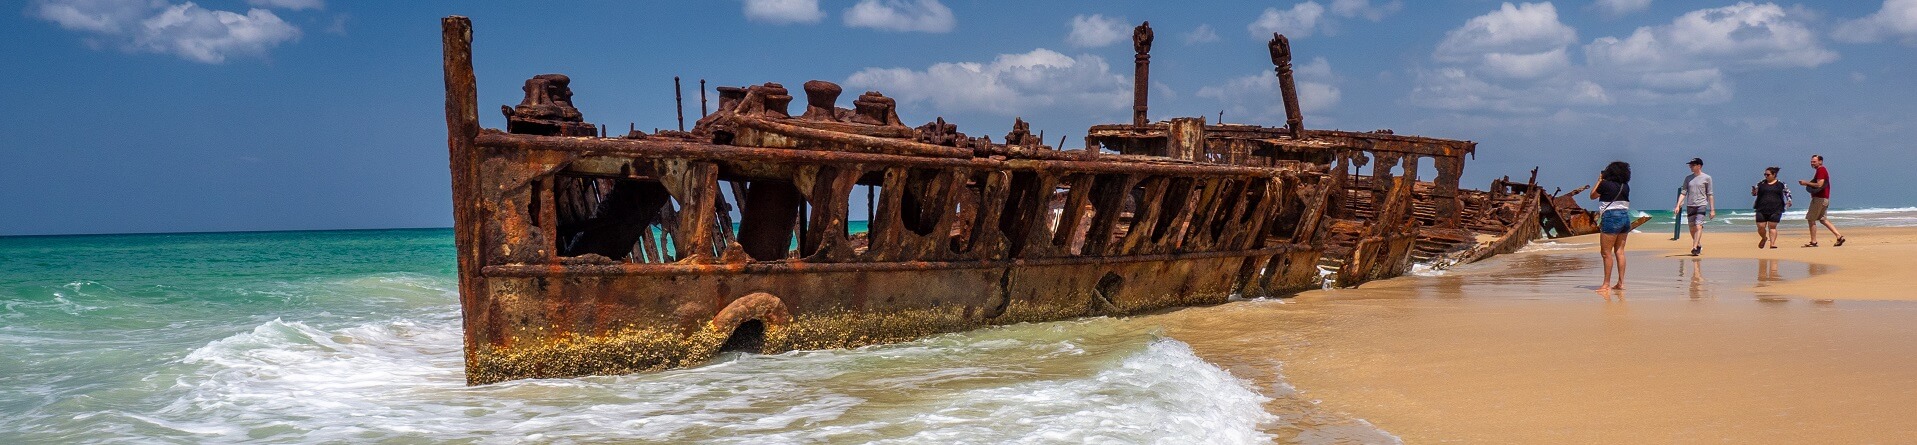 How many shipwrecks are on Fraser Island?